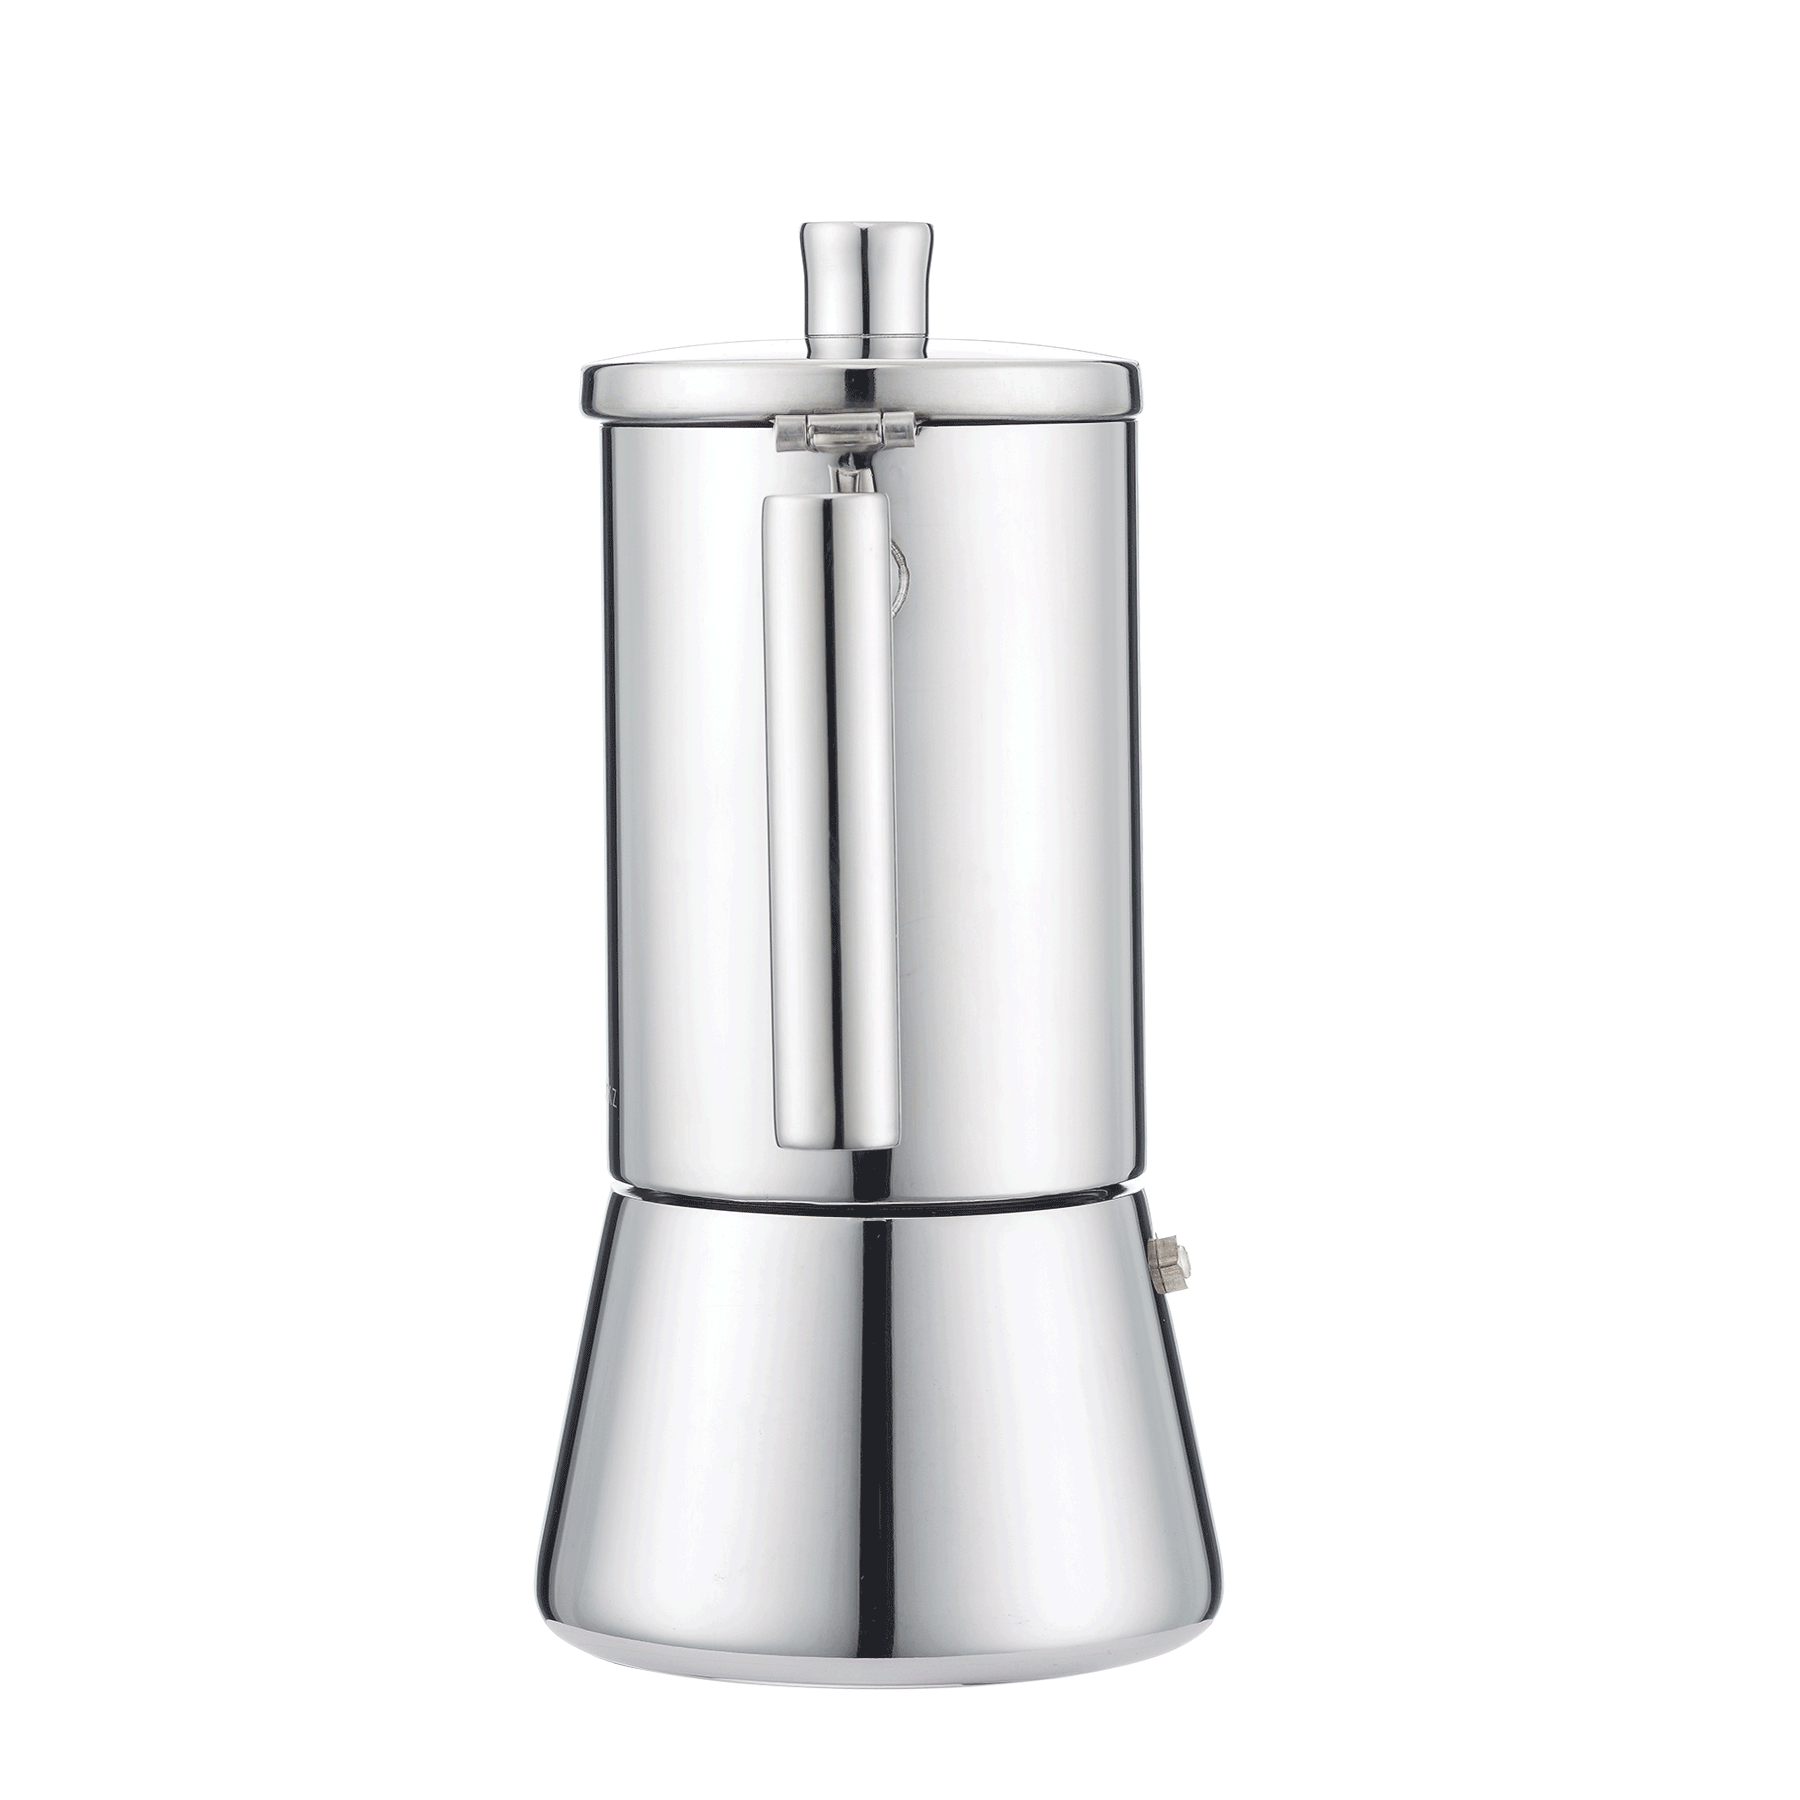 Espresso Maker Induction Coffee Maker Stainless Steel Stovetop Coffee€